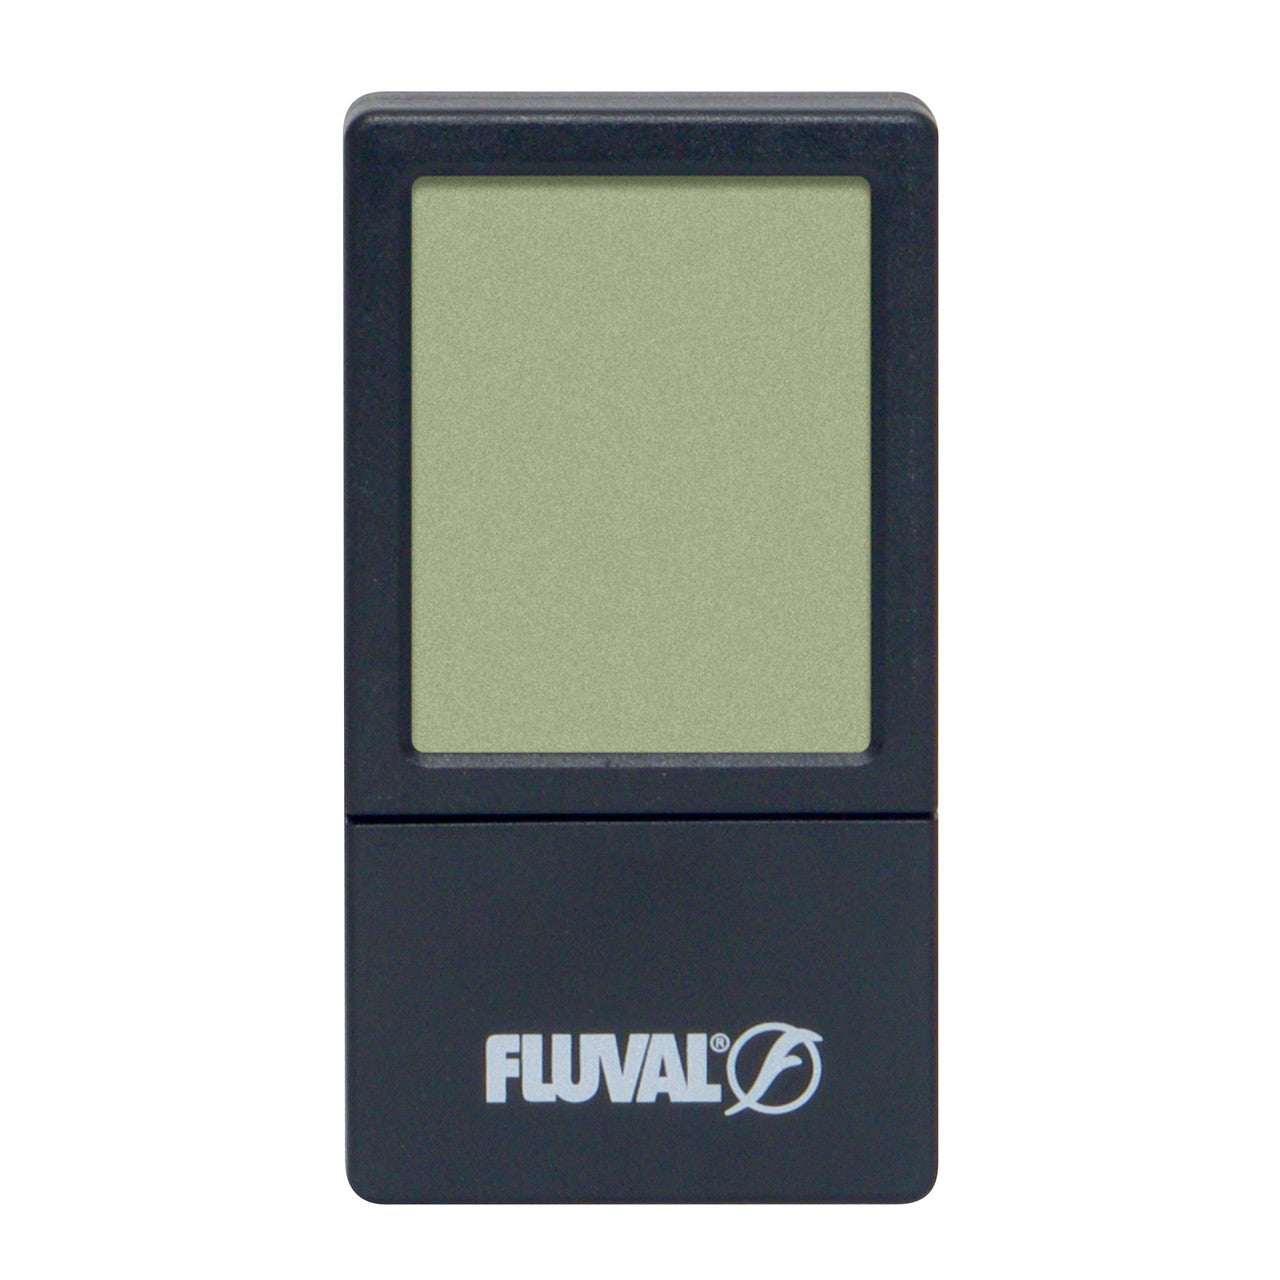 Fluval Wireless 2-in-1 Digital Thermometer 015561111935